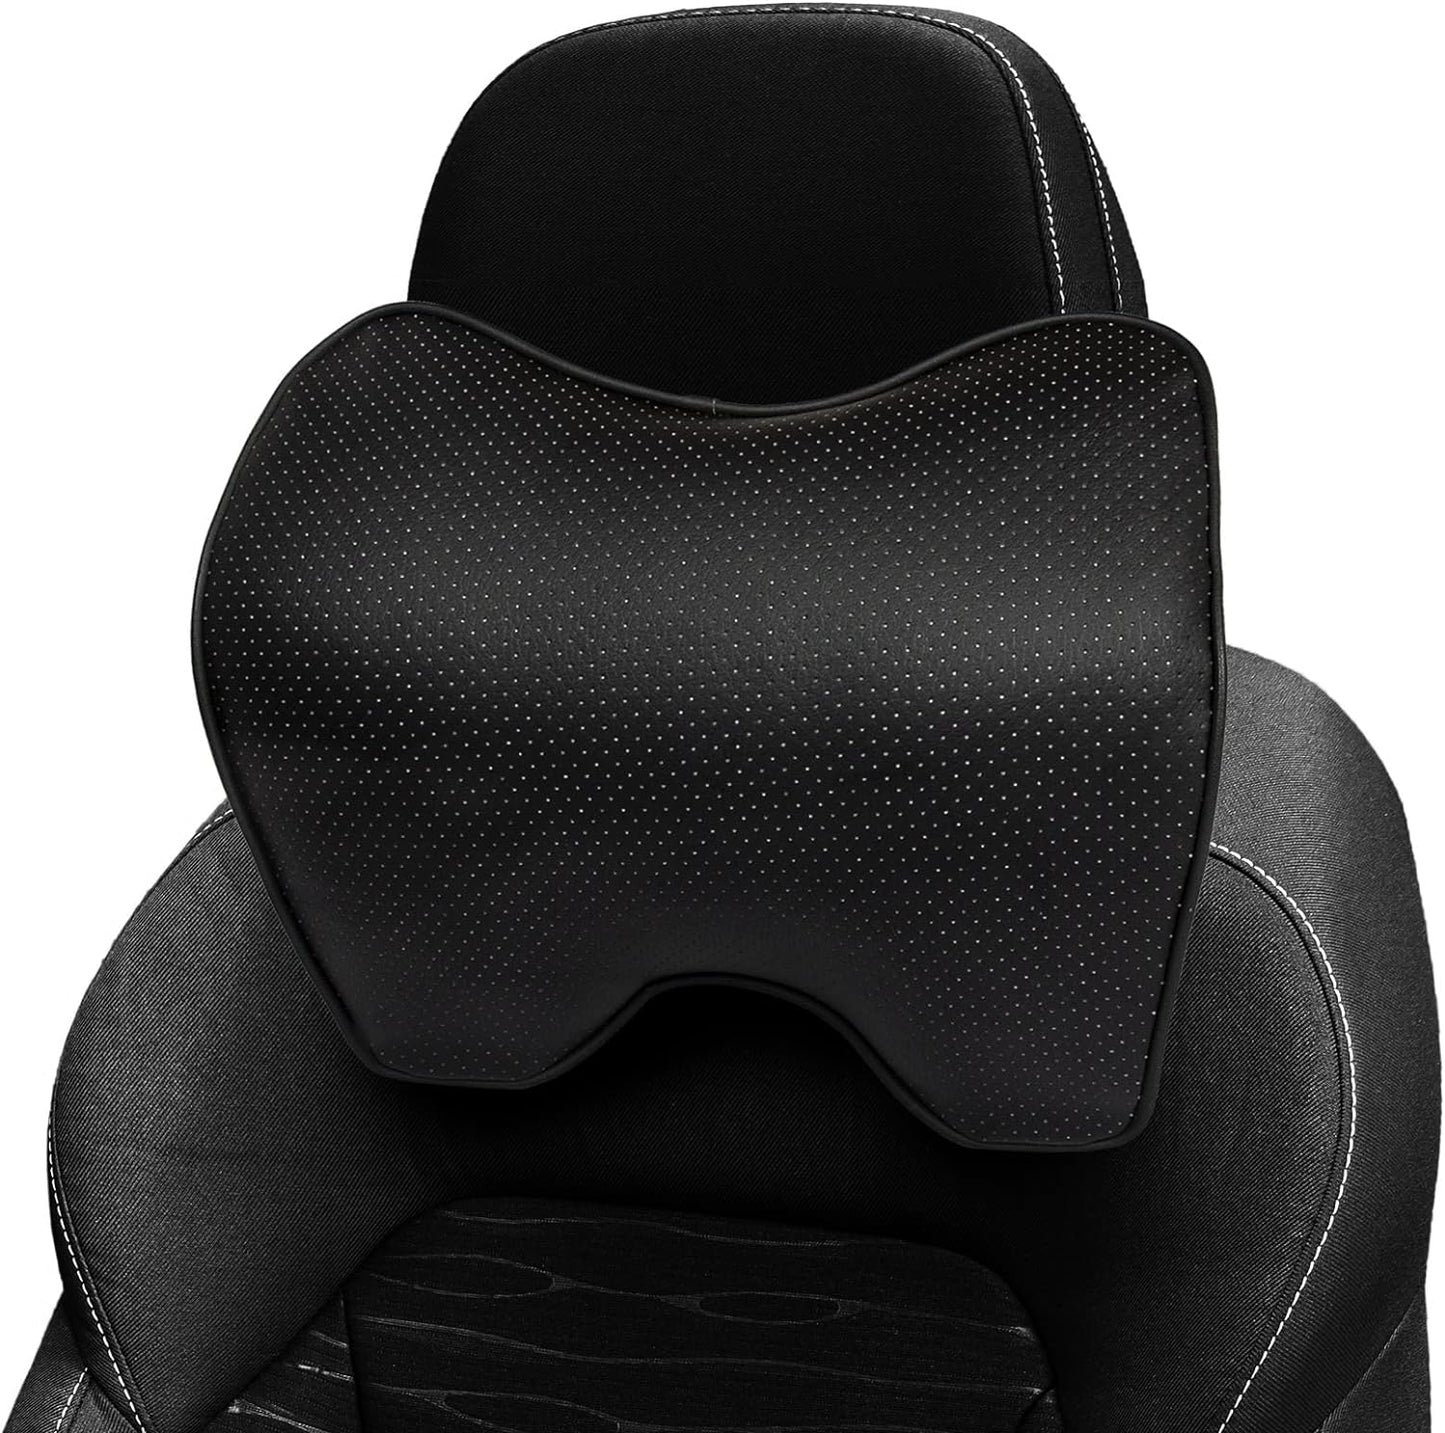 Icomfyway Car Neck Support Pillow for Neck Pain Relief When Driving,Headrest Pillow for Car Seat with Soft Memory Foam – Black